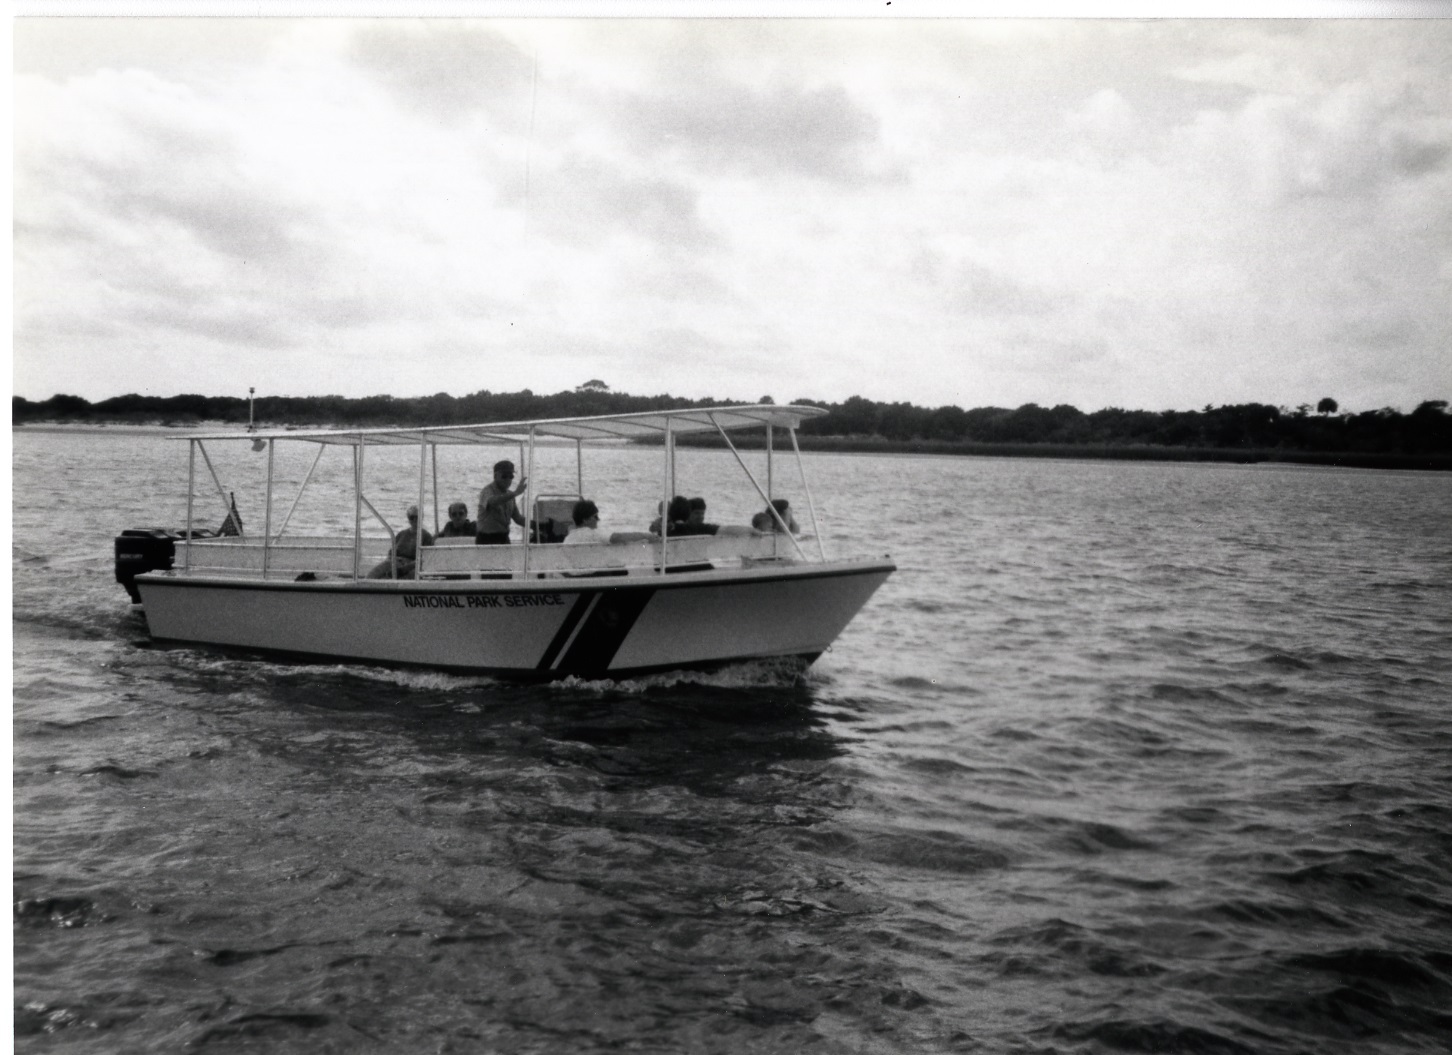 White fiberglass v-hulled boat with canopy.  Stripe on the side and text reading National Park Service